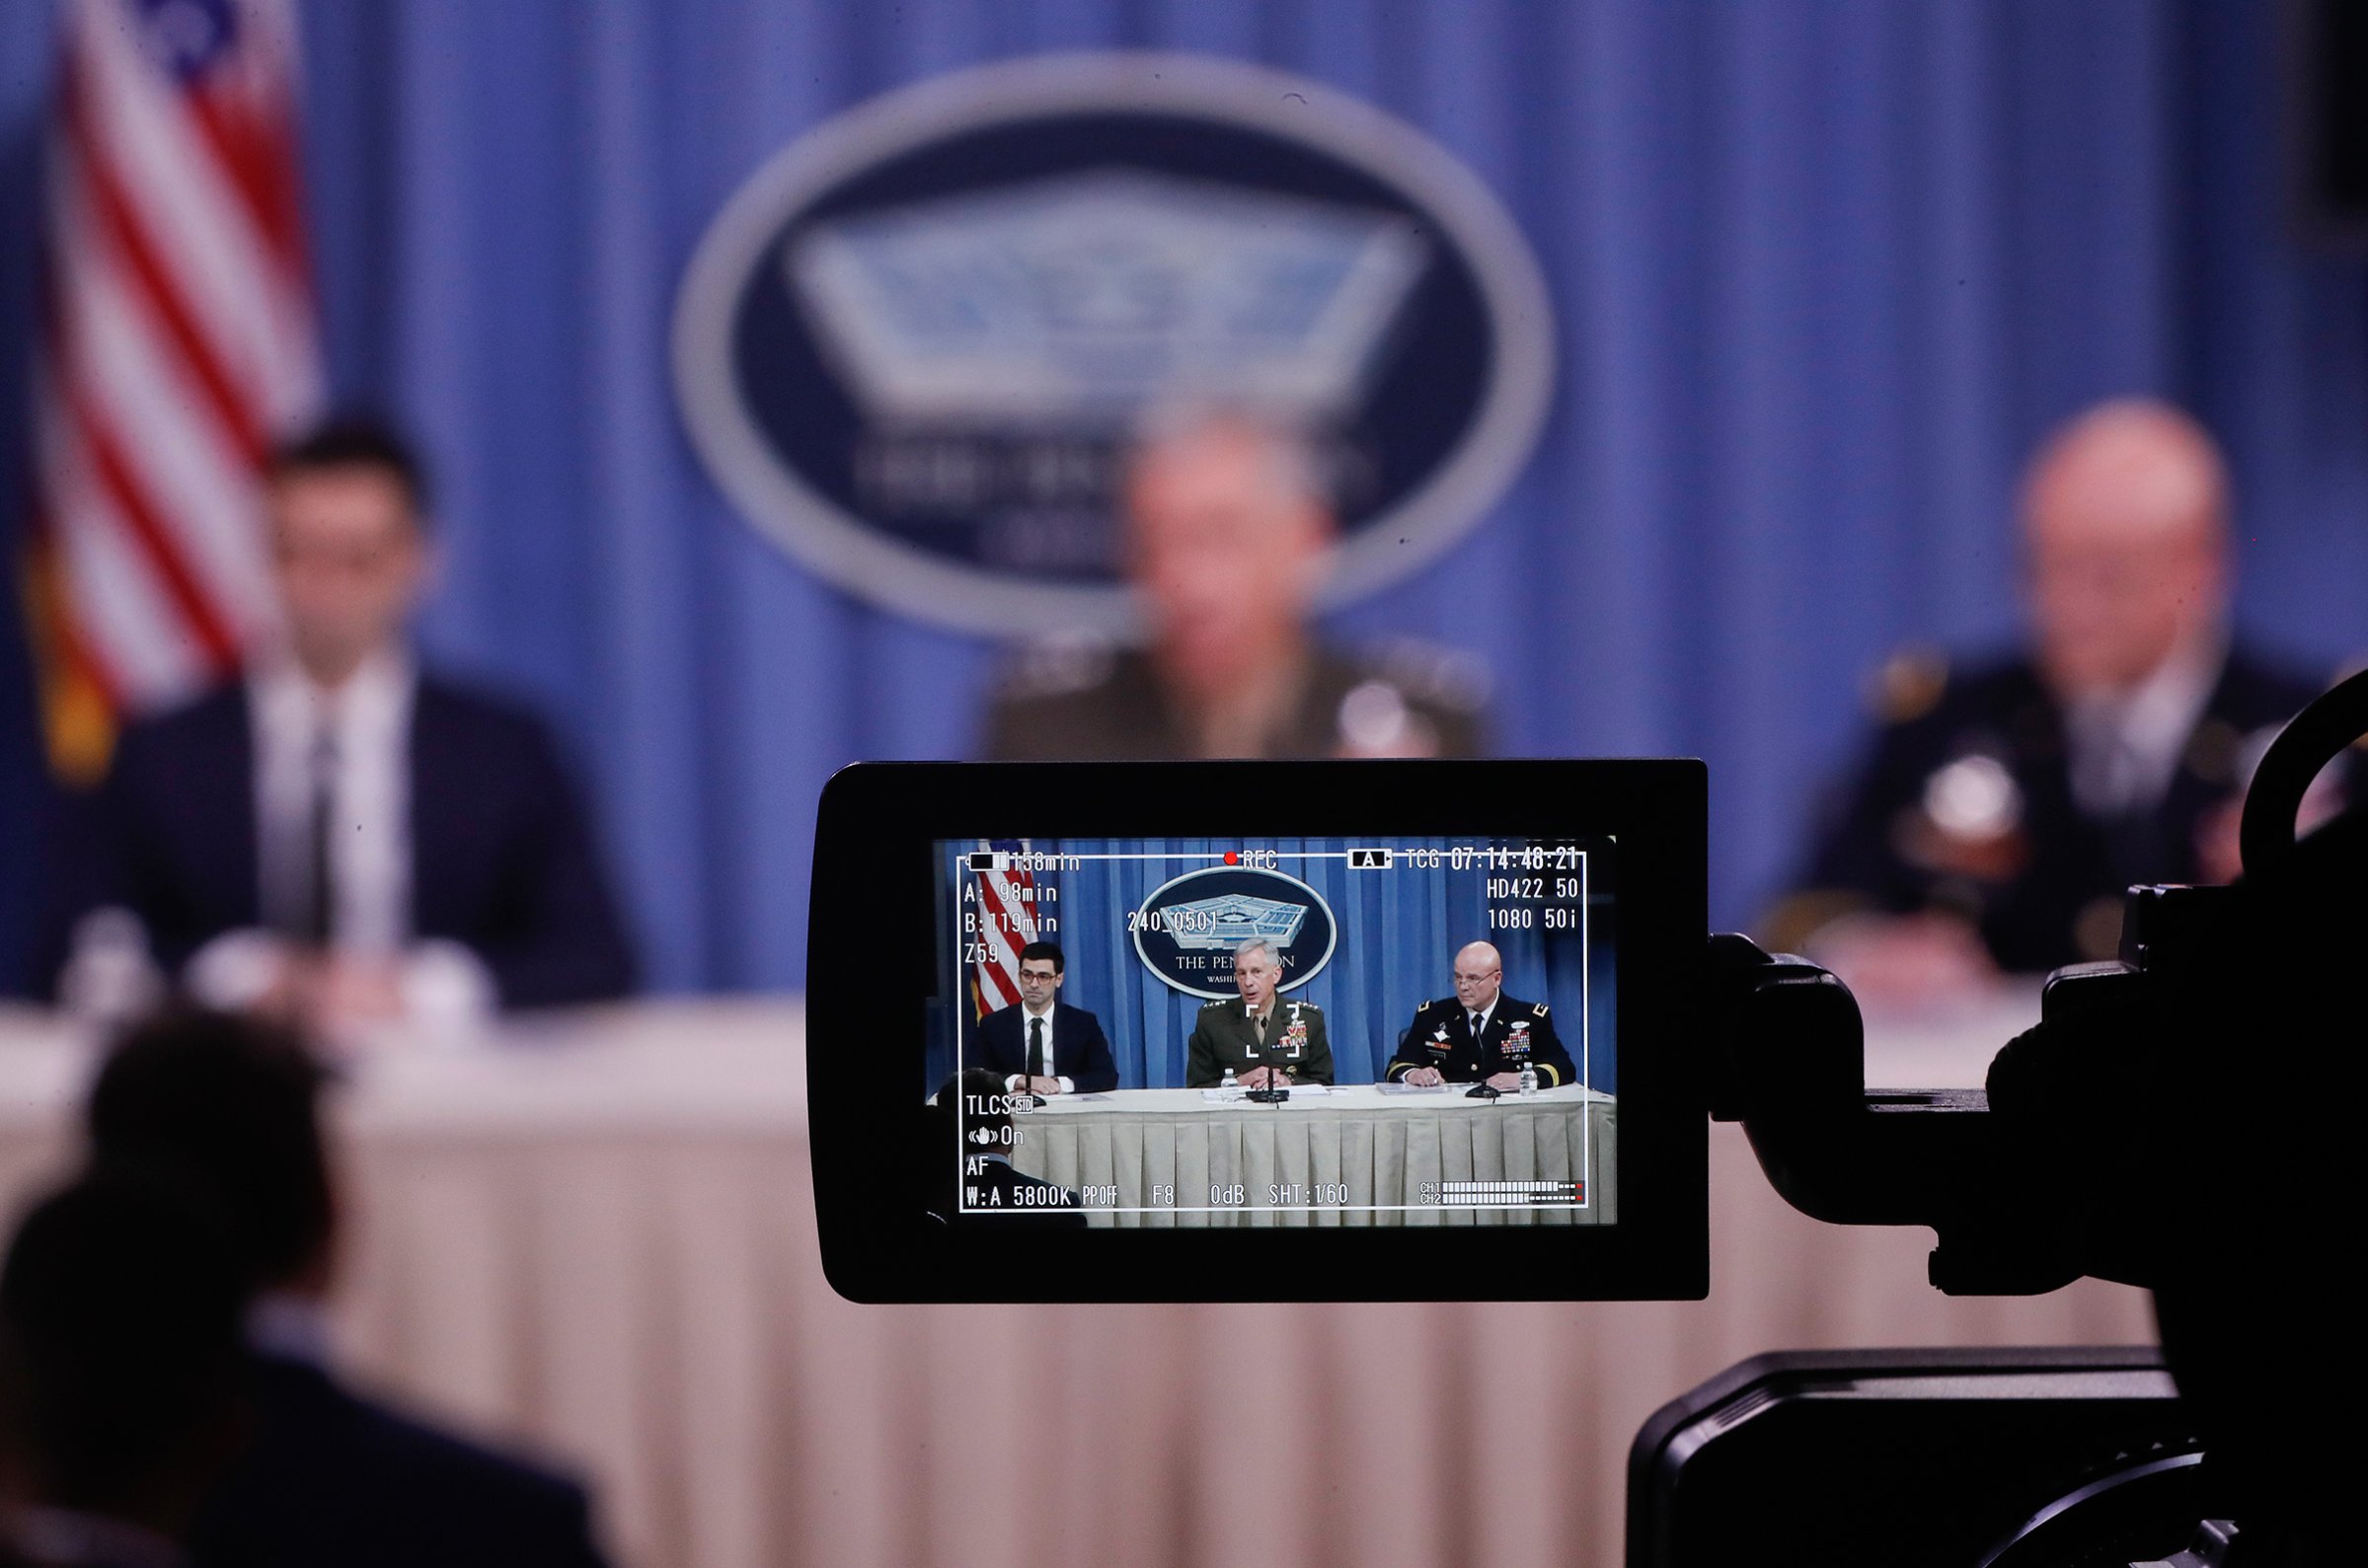 From left, Assistant Secretary of Defense for International Security Affairs Robert S. Karem, Marine Gen. Thomas D. Waldhauser and Army Maj. Gen. Roger L. Cloutier are seen through a television camera viewfinder while briefing members of the media at the Pentagon, May 10, 2018.